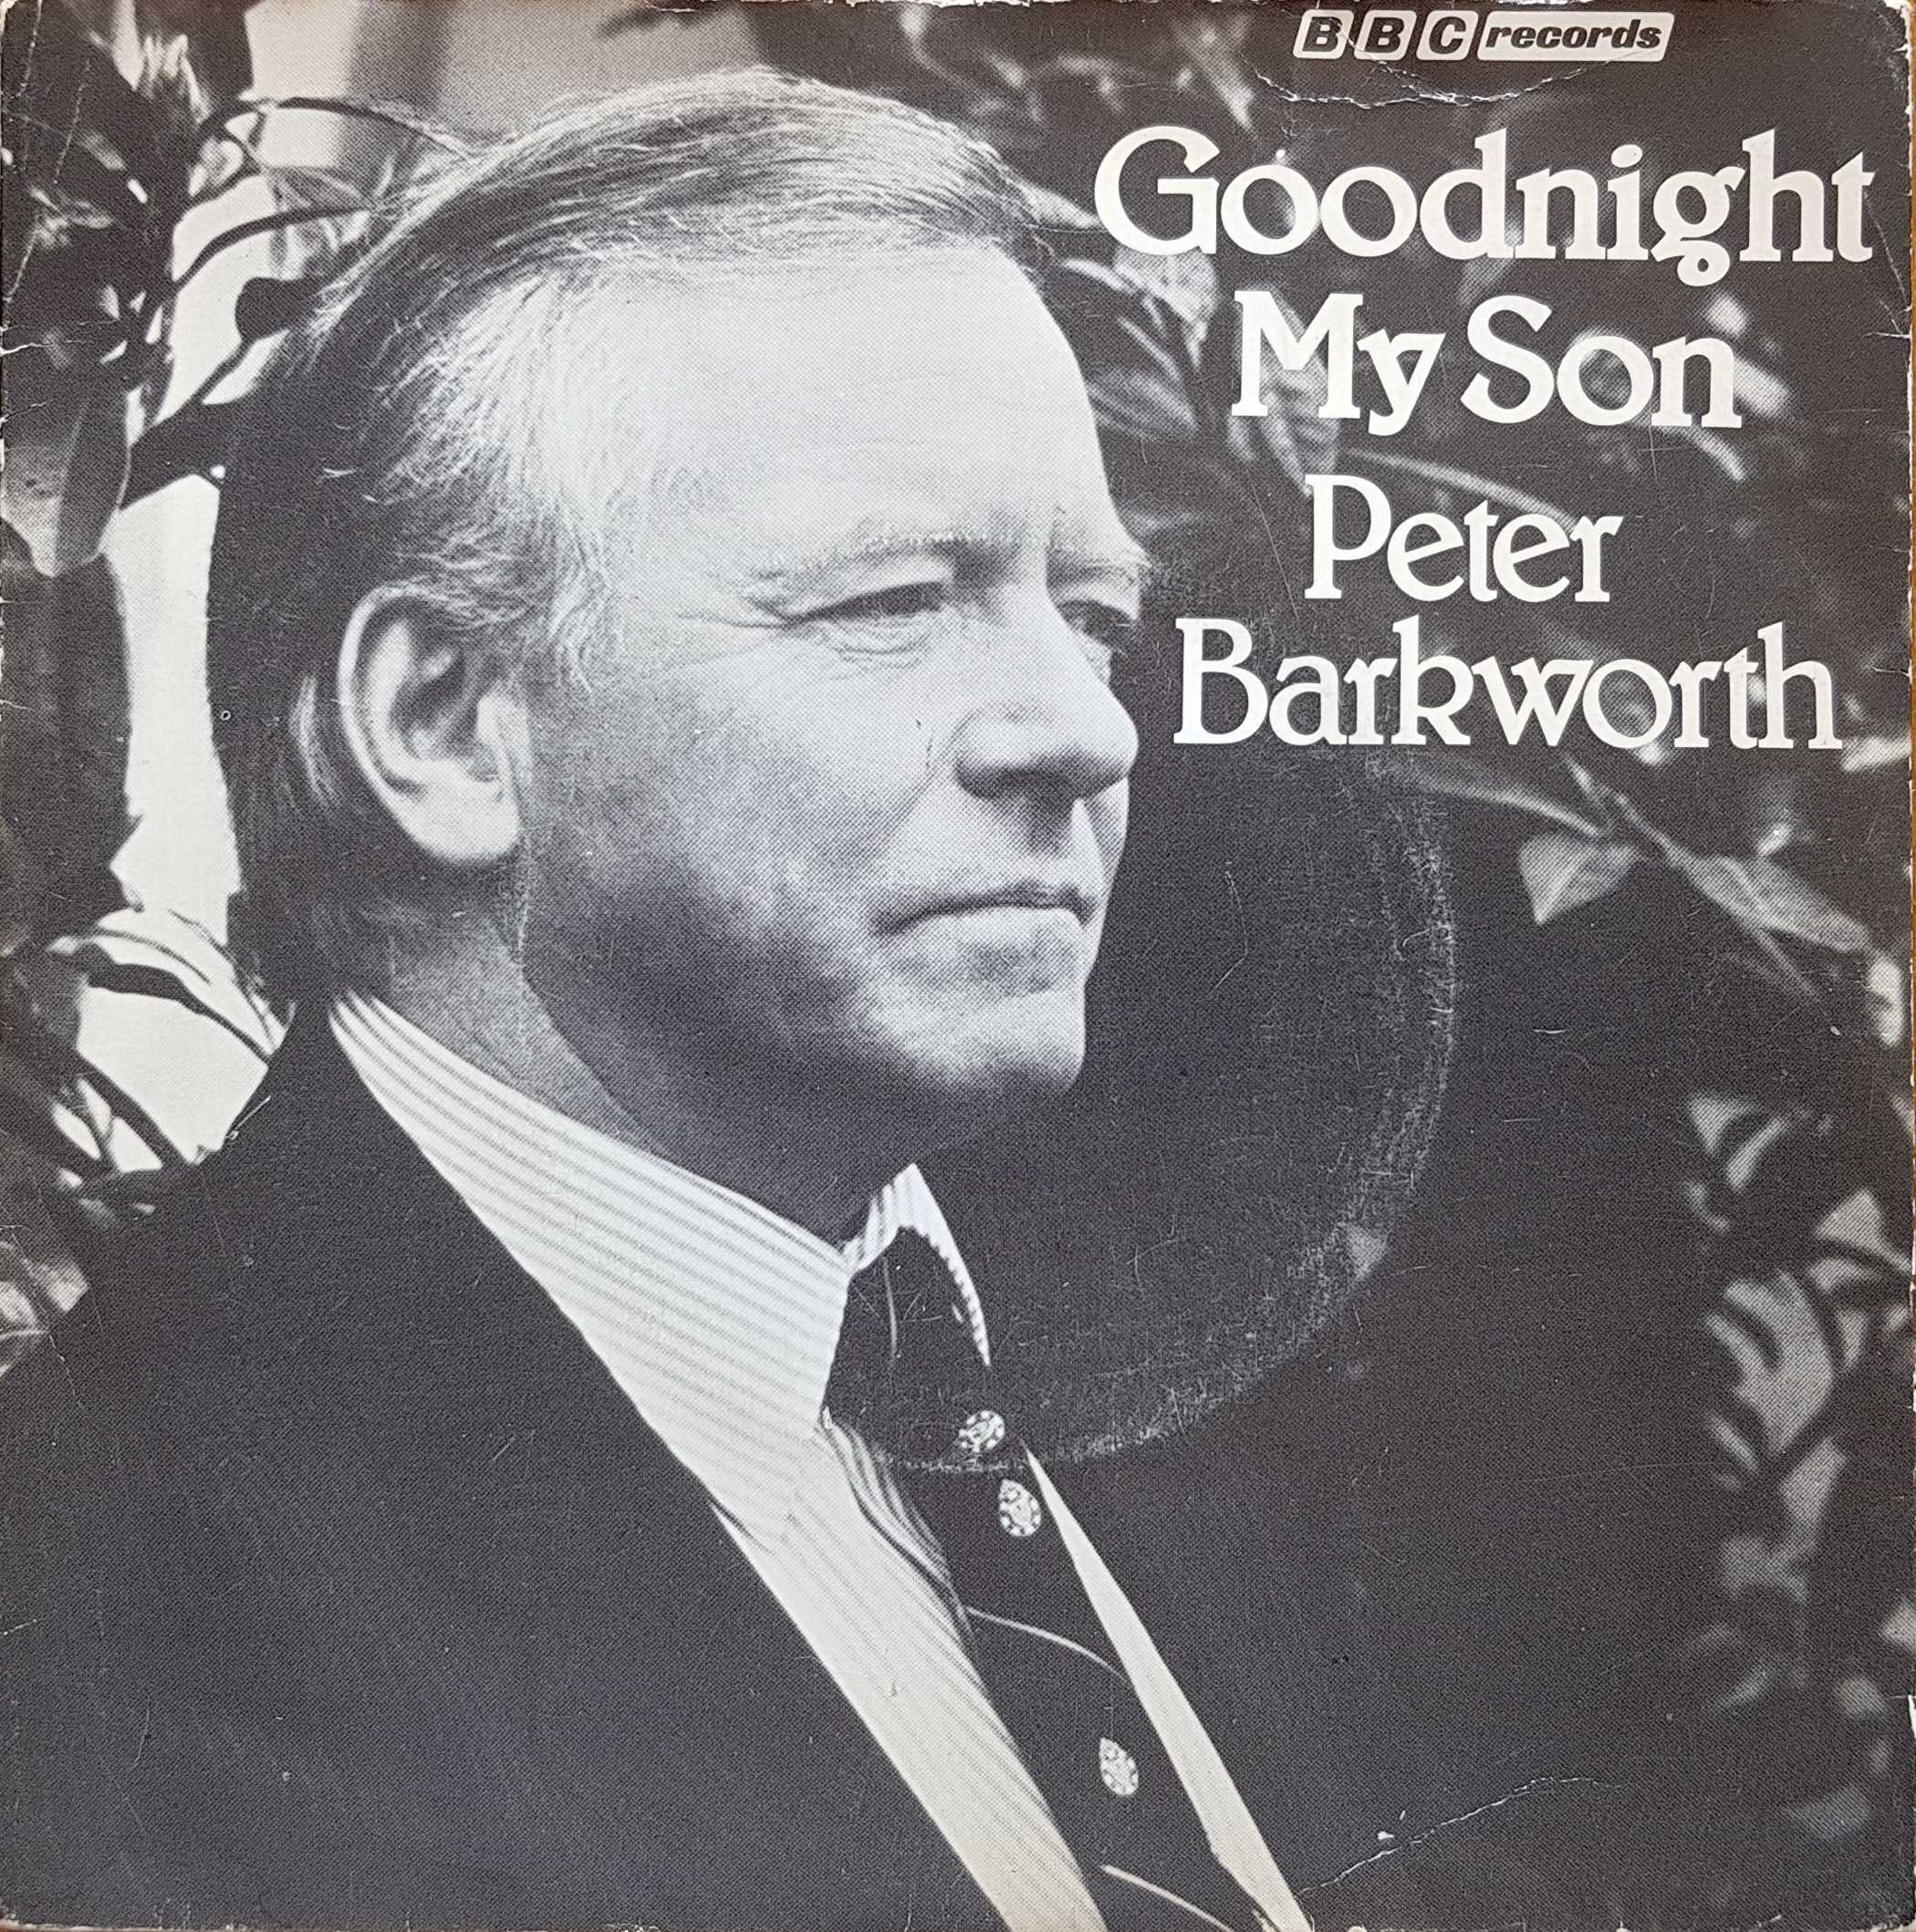 Picture of Goodnight my son by artist Peter Lindstrom / Michael Reed from the BBC singles - Records and Tapes library